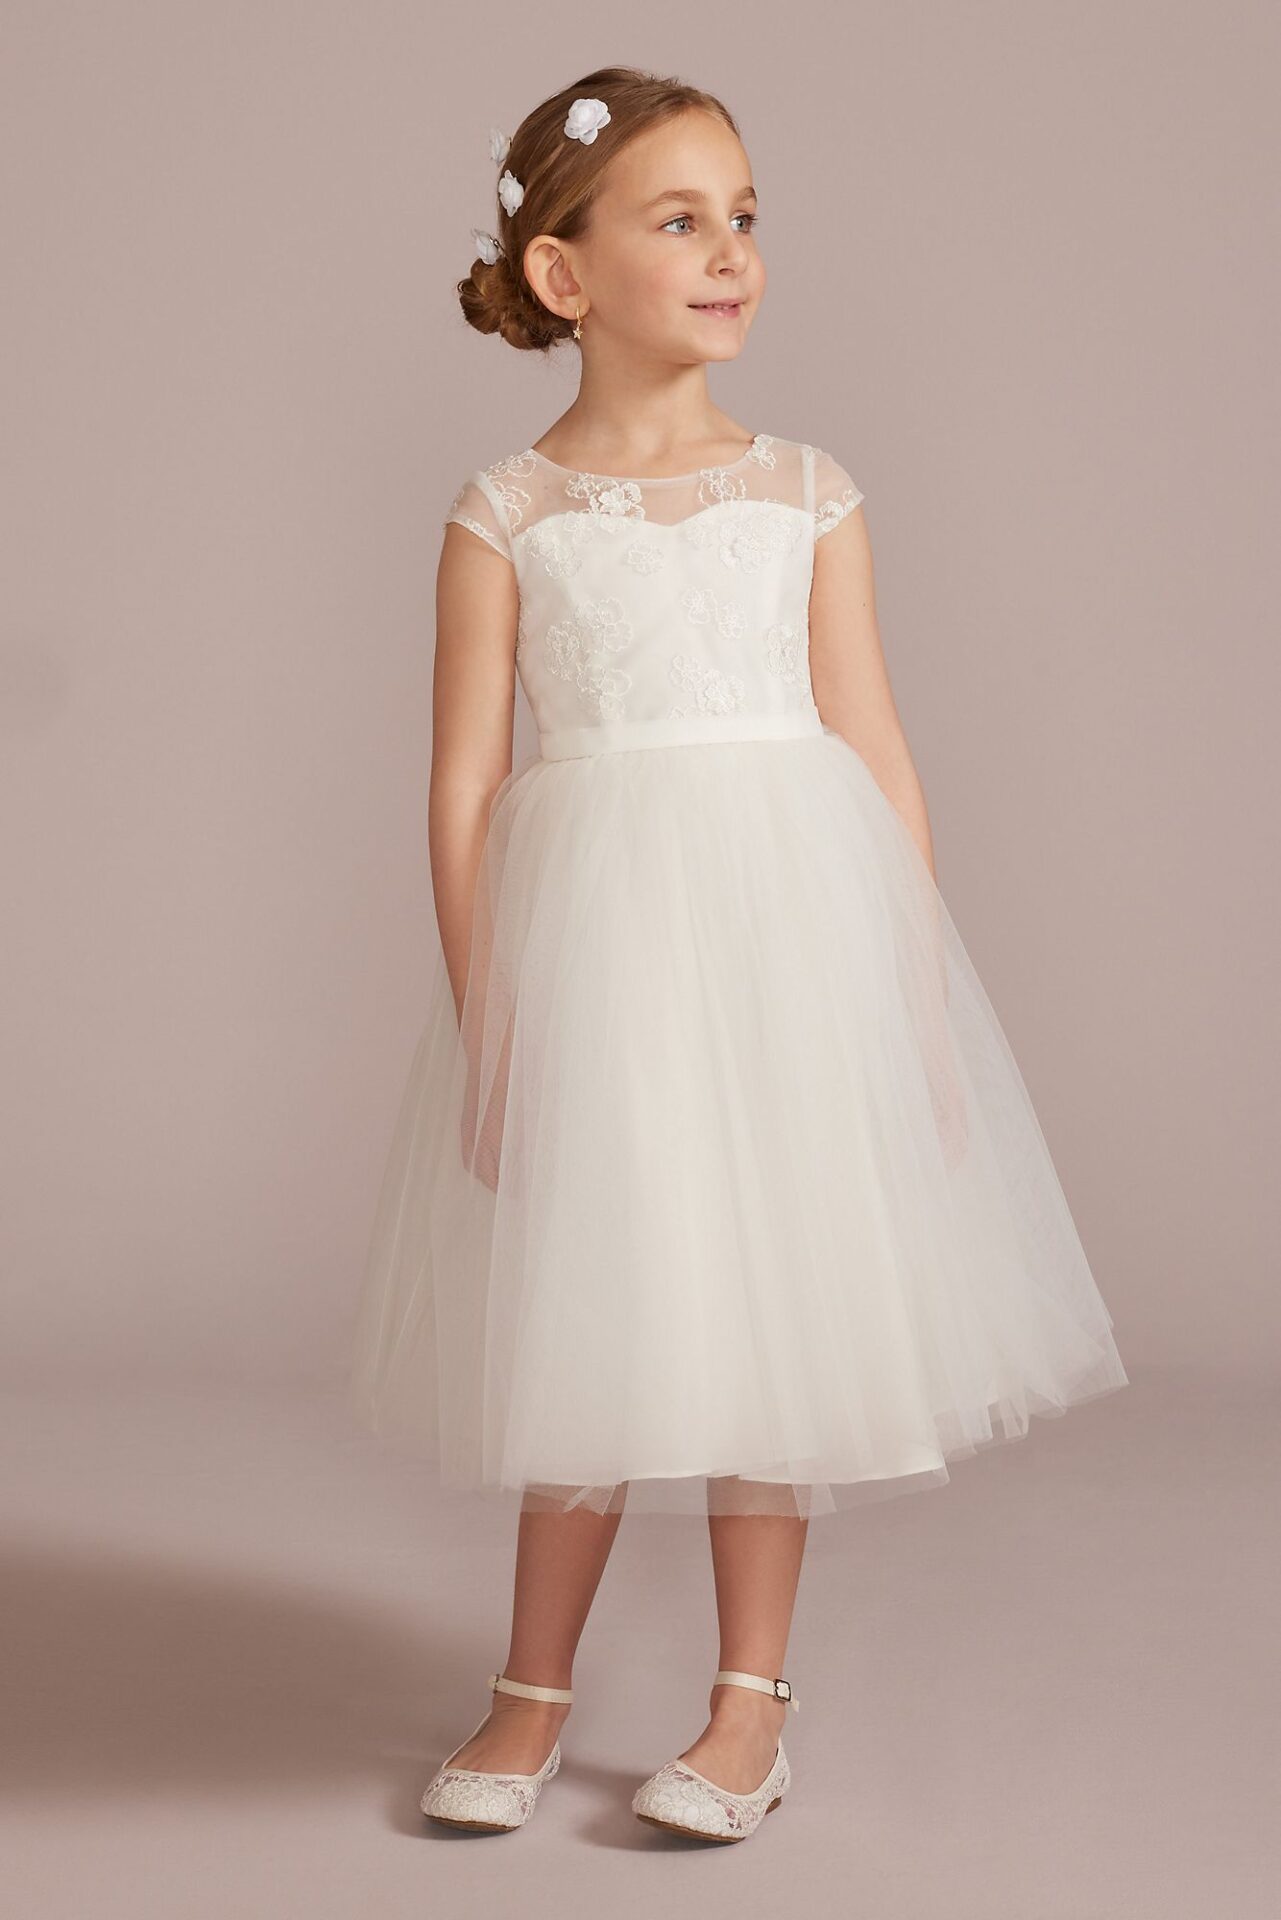 Floral Lace Illusion Cap Sleeve Flower Girl Dress WG1477